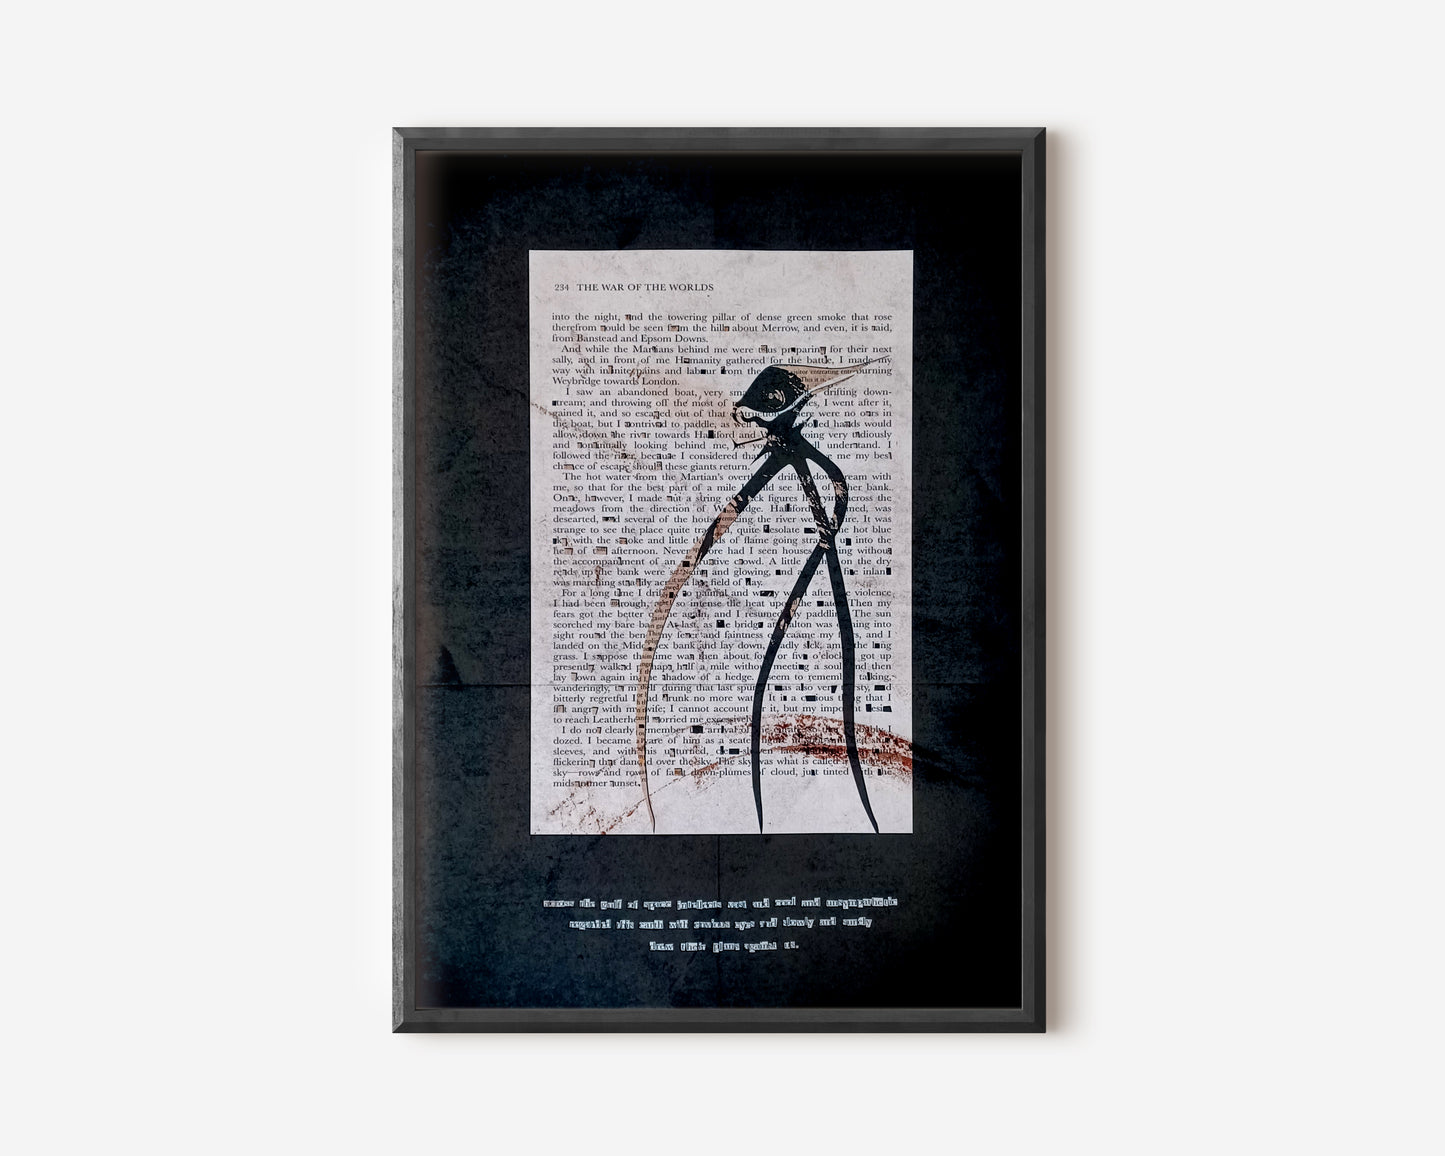 "The Gulf Raven" // Grunge Mashup Print War of the Worlds and The Raven in Black